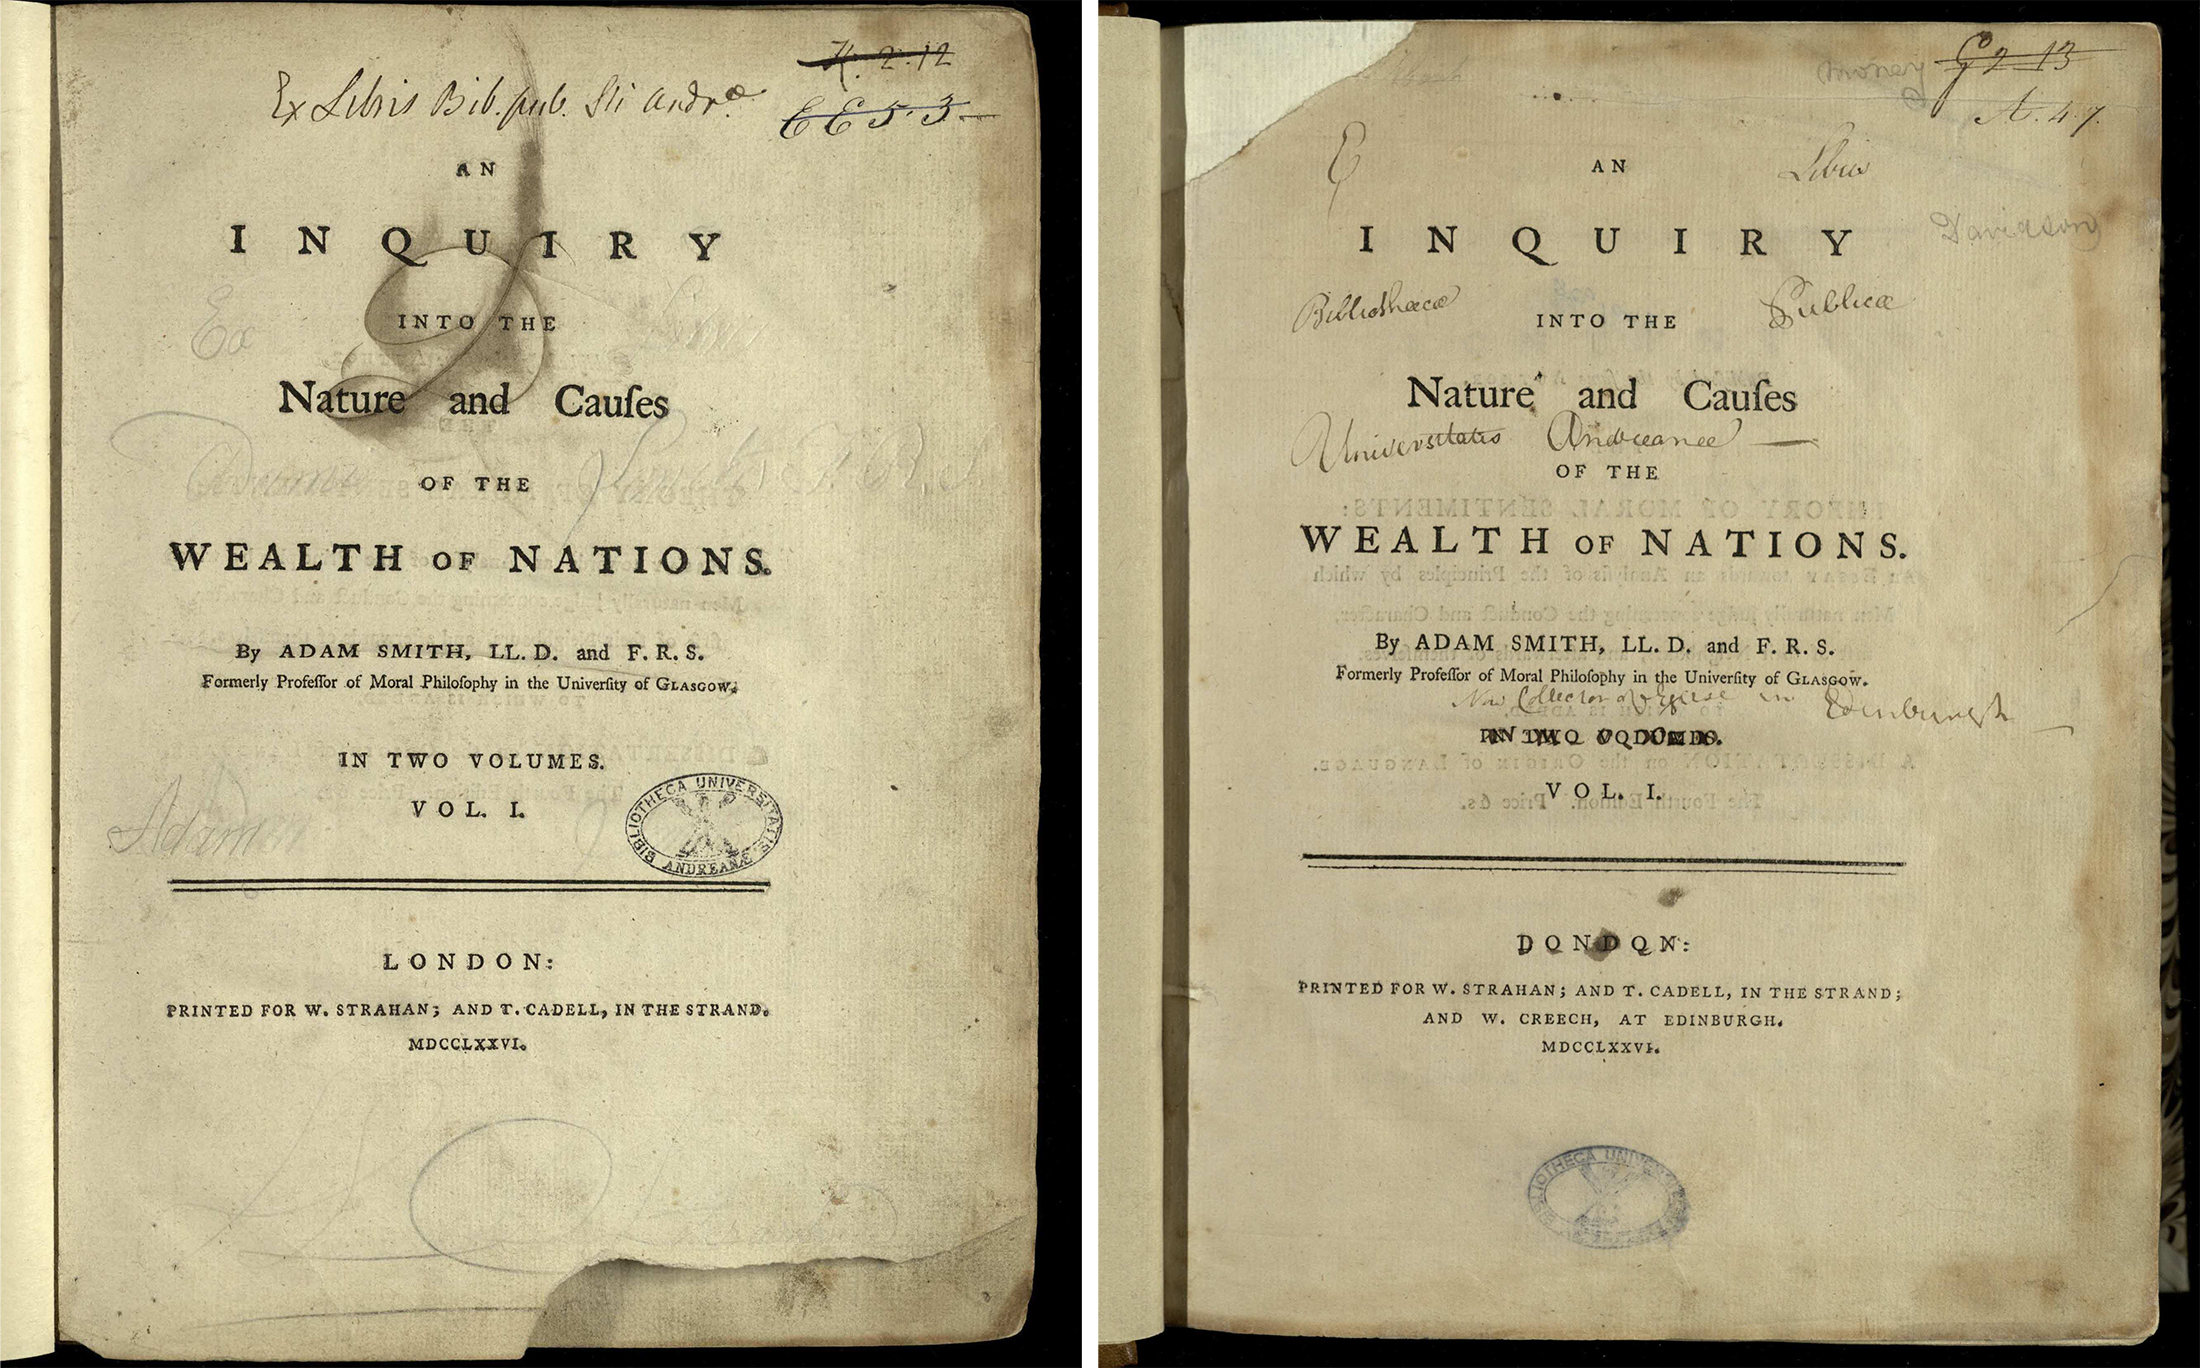 The title page of the first edition of Adam Smith’s Wealth of Nations, that on the right having in the imprint “and W. Creech at Edinburgh”. St Andrews copies rf HB251.S6 (SR) (set 2) and rf HB251.S6 (SR).